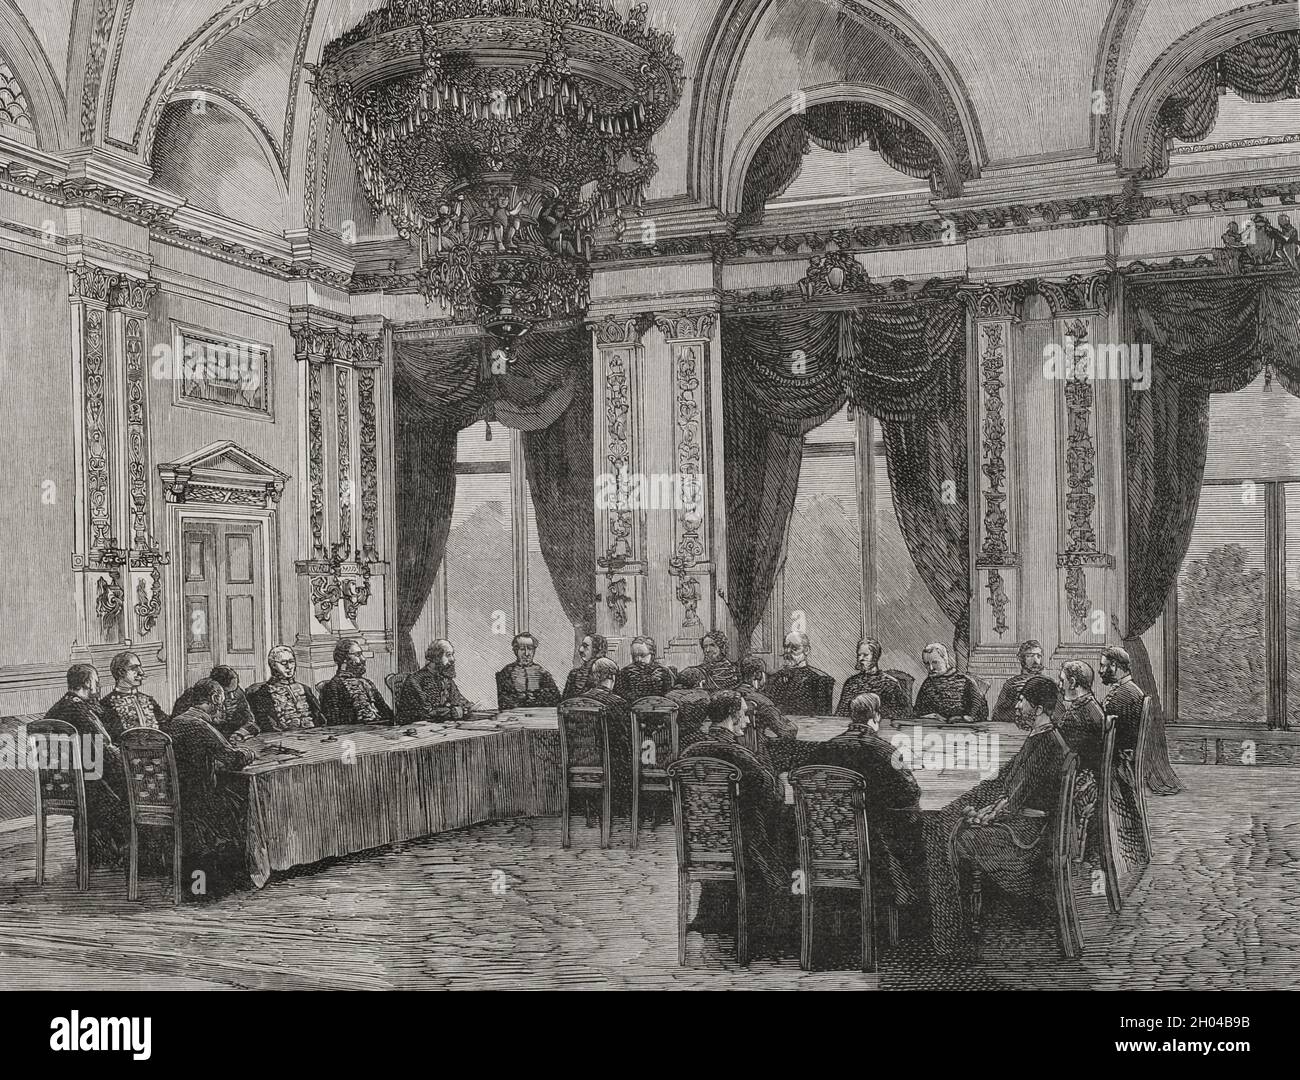 History of Germany. Congress of Berlin, June 13, 1878. It was held at the Radziwill Palace, the new official residence of the Prince of Bismarck (Palace of the Chancellery of the German Empire). The solution of the multiple issues of the Eastern Question was discussed. The European powers of Germany, Austria-Hungary, France, Great Britain, Italy, Russia and the Ottoman Empire participated. First session of the Congress. Engraving by Capuz. La Ilustración Española y Americana, 1878. Stock Photo